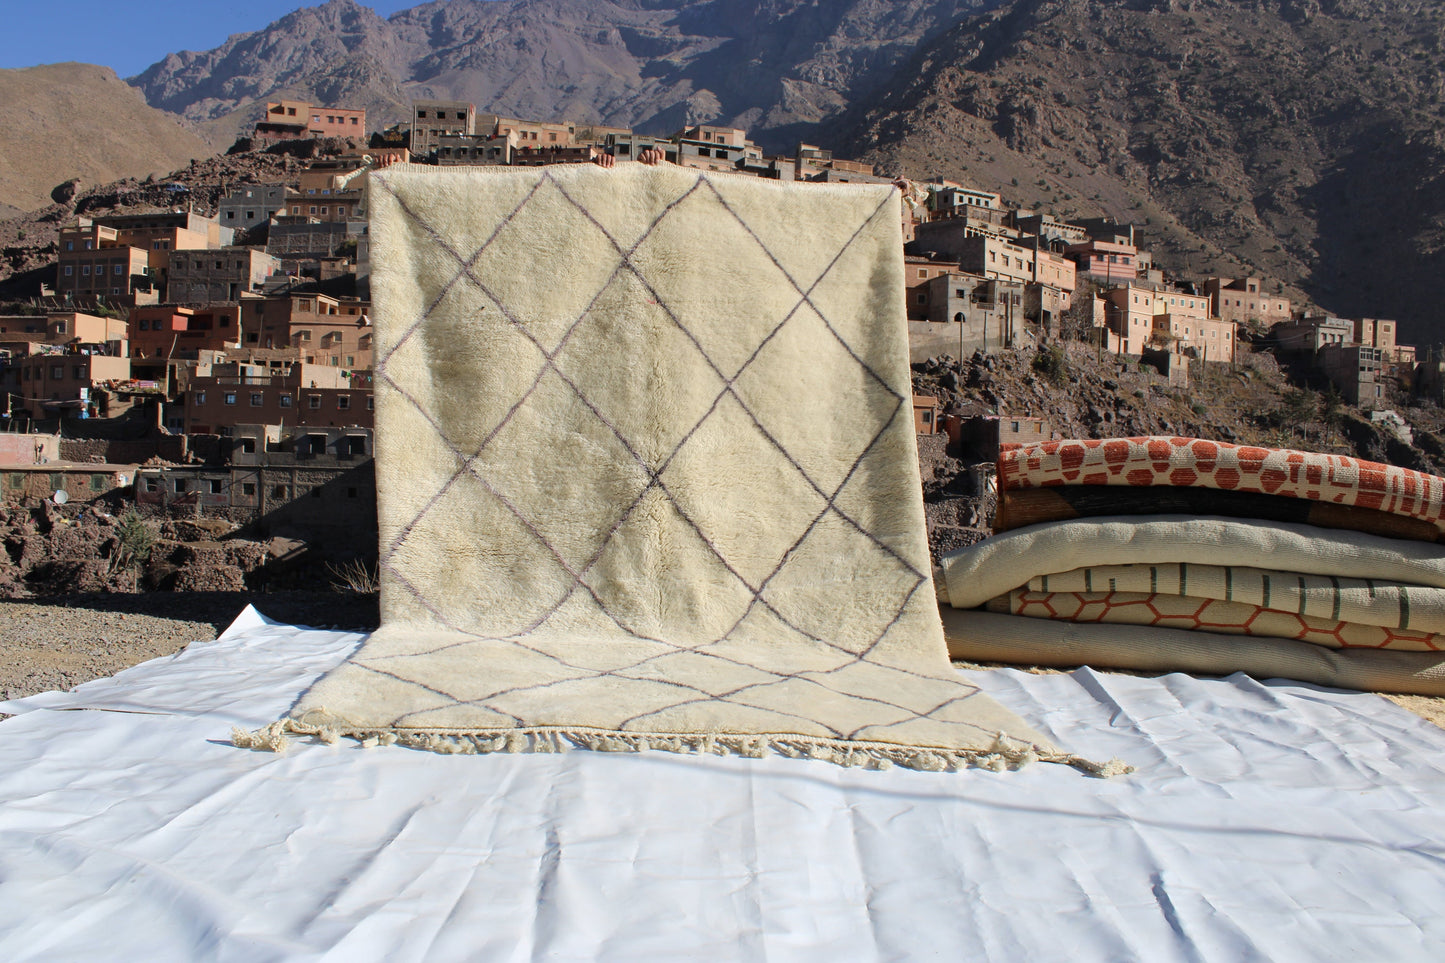 Beni Ourain rugs originate from the Atlas Mountains of Morocco and are characterized by their distinctive, neutral-toned, and geometric designs. These handwoven rugs often feature a plush pile and are made by the Berber tribes,  size is 310x200 cm